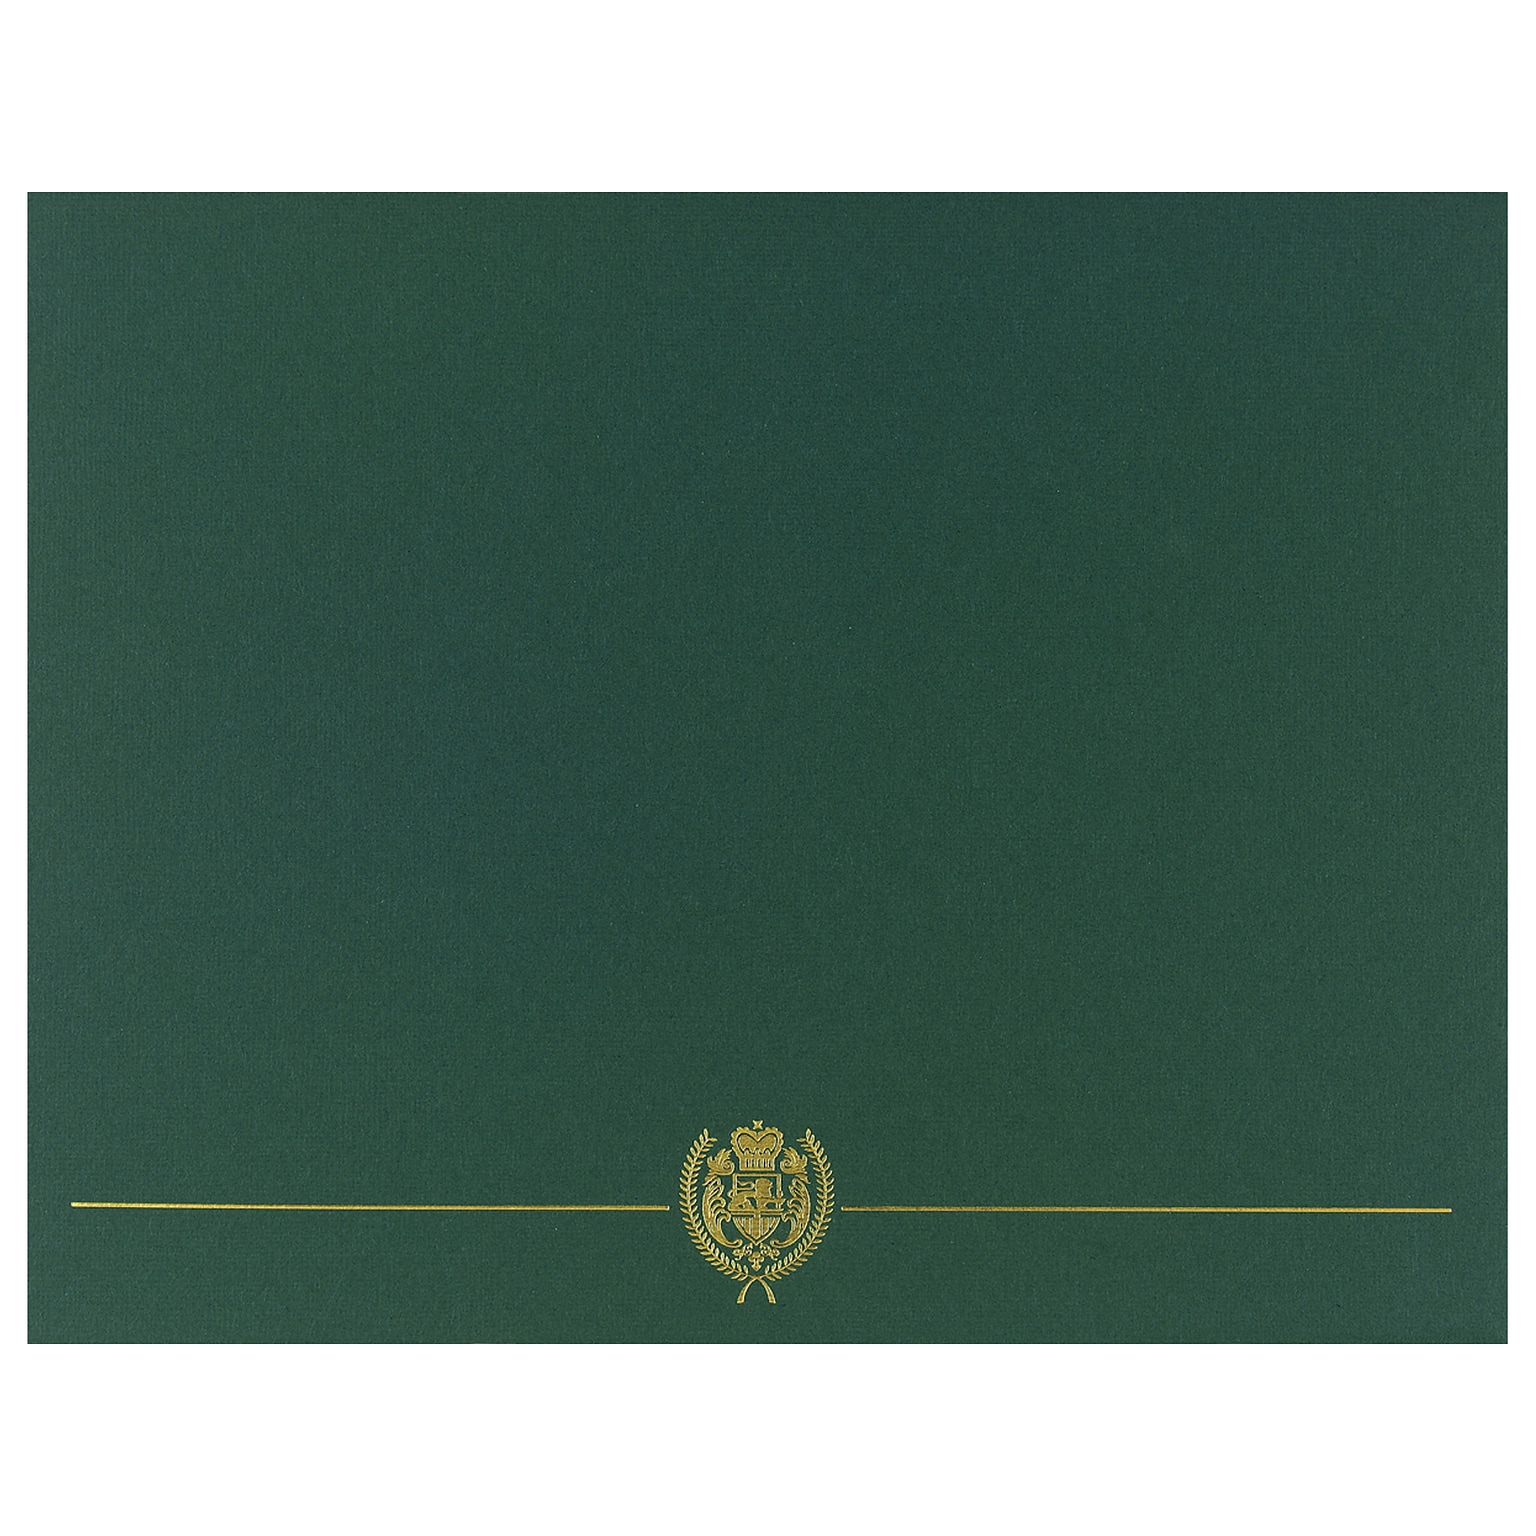 Great Papers Classic Crest Certificate Holders, 12 x 9.38, Hunter Green, 50/Pack (903118PK10)